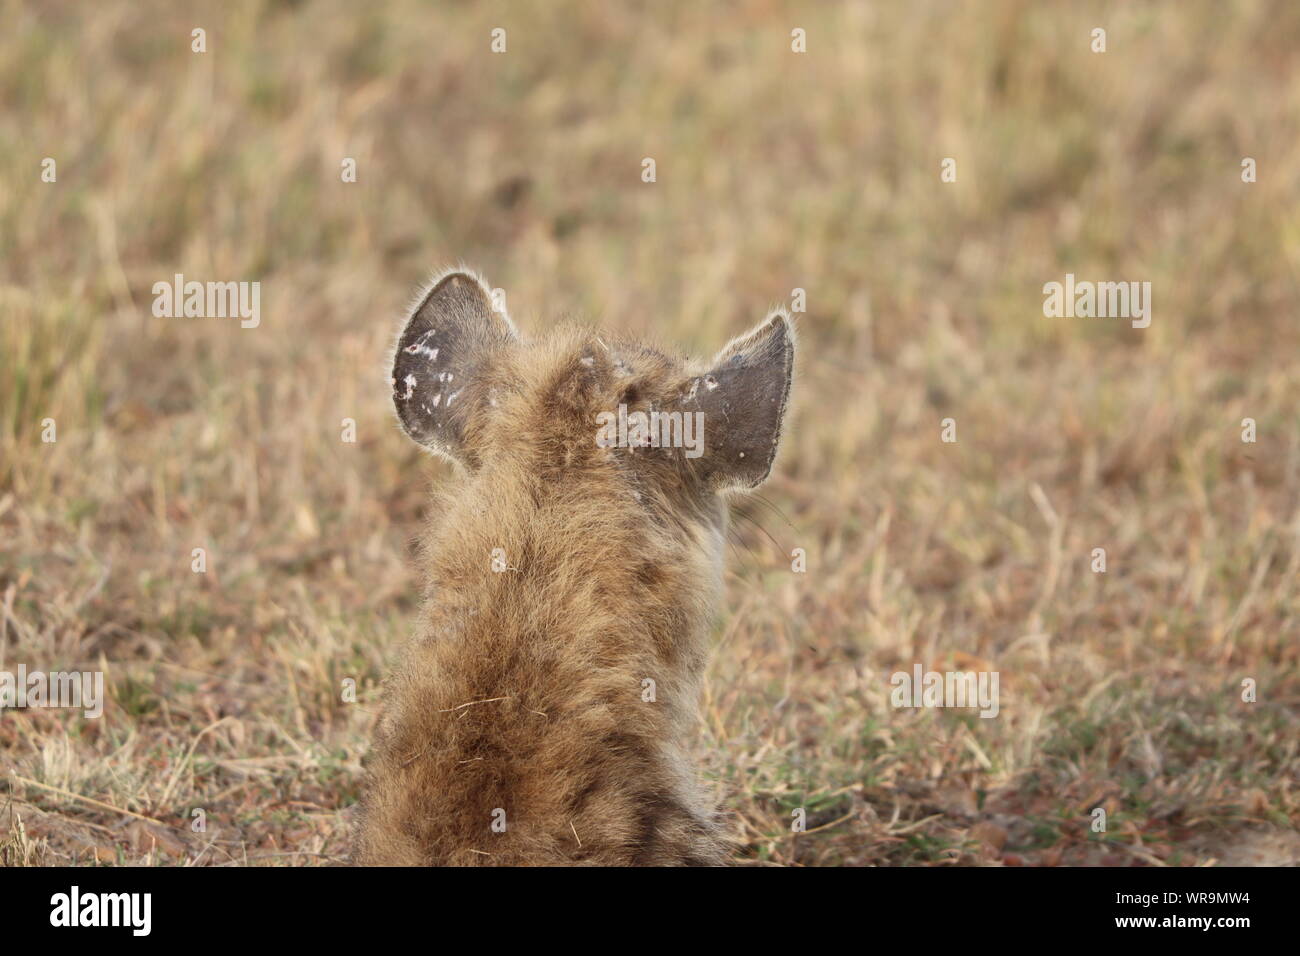 Spotted hyena ears with scars, closeup, Masai Stock Photo